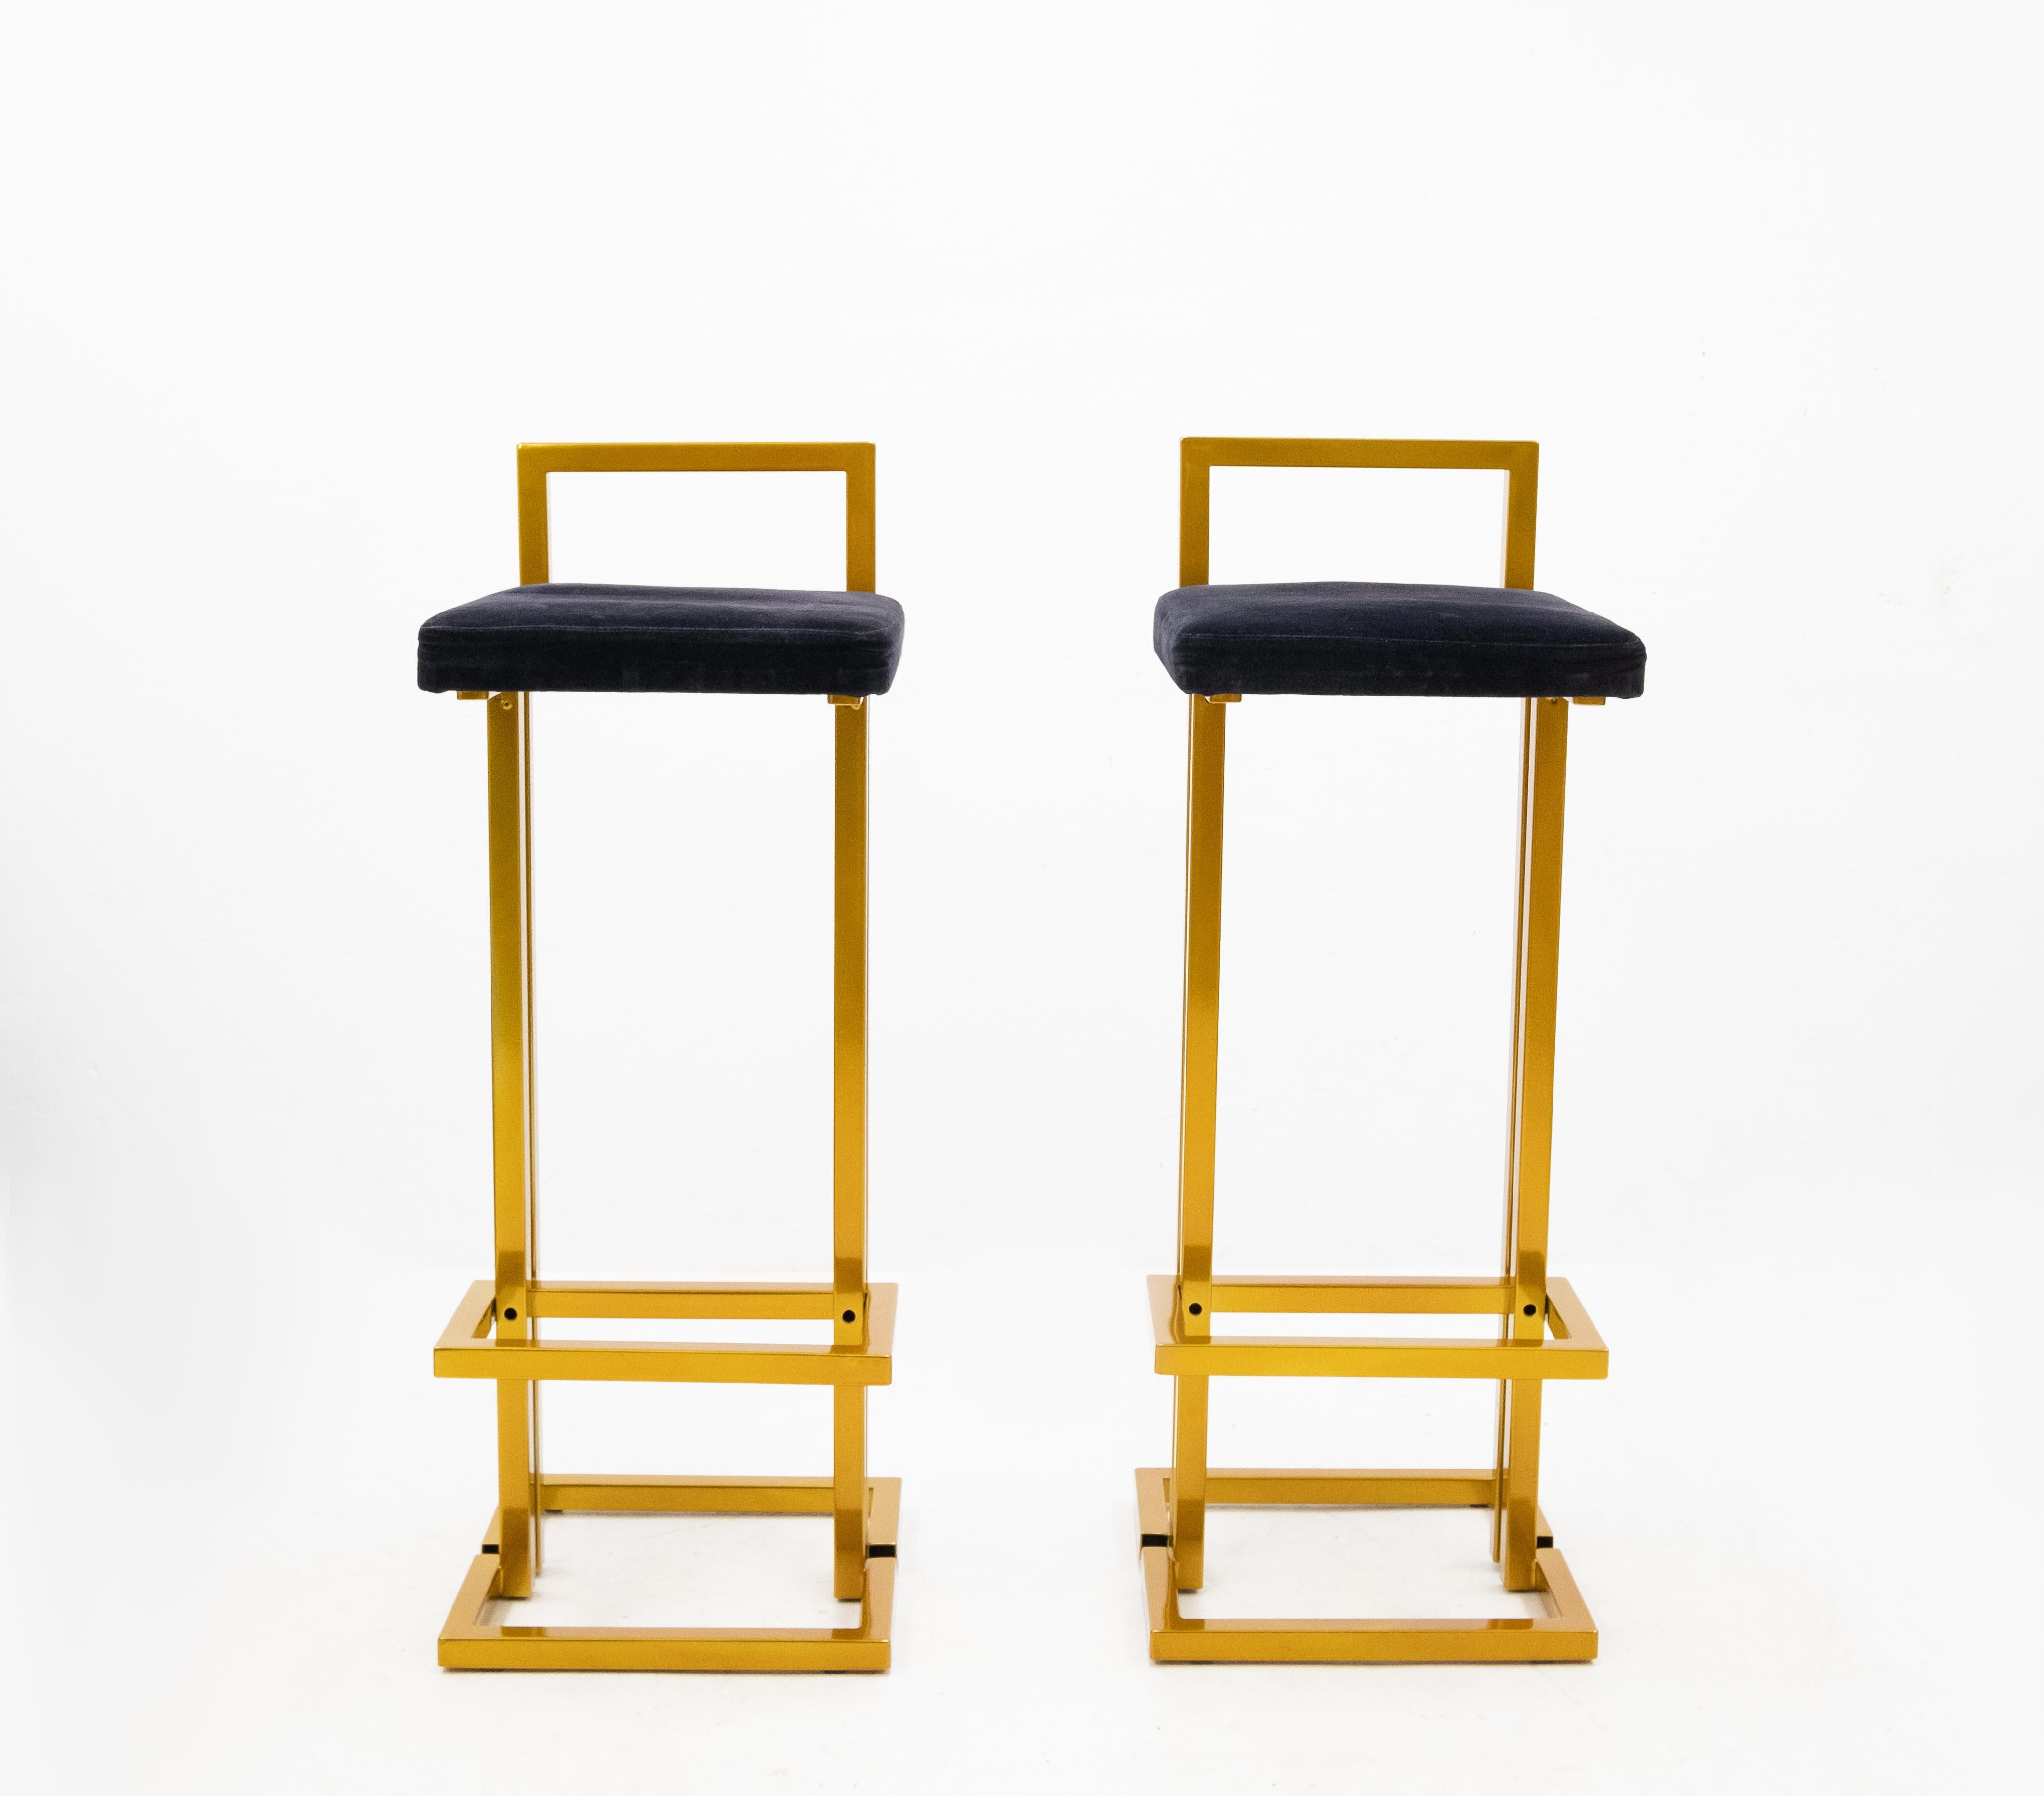 Two original Maison Jansen bar stools. Refinish in a gold color powder coating.
Comes with a blue velvet upholstery. Very good condition.